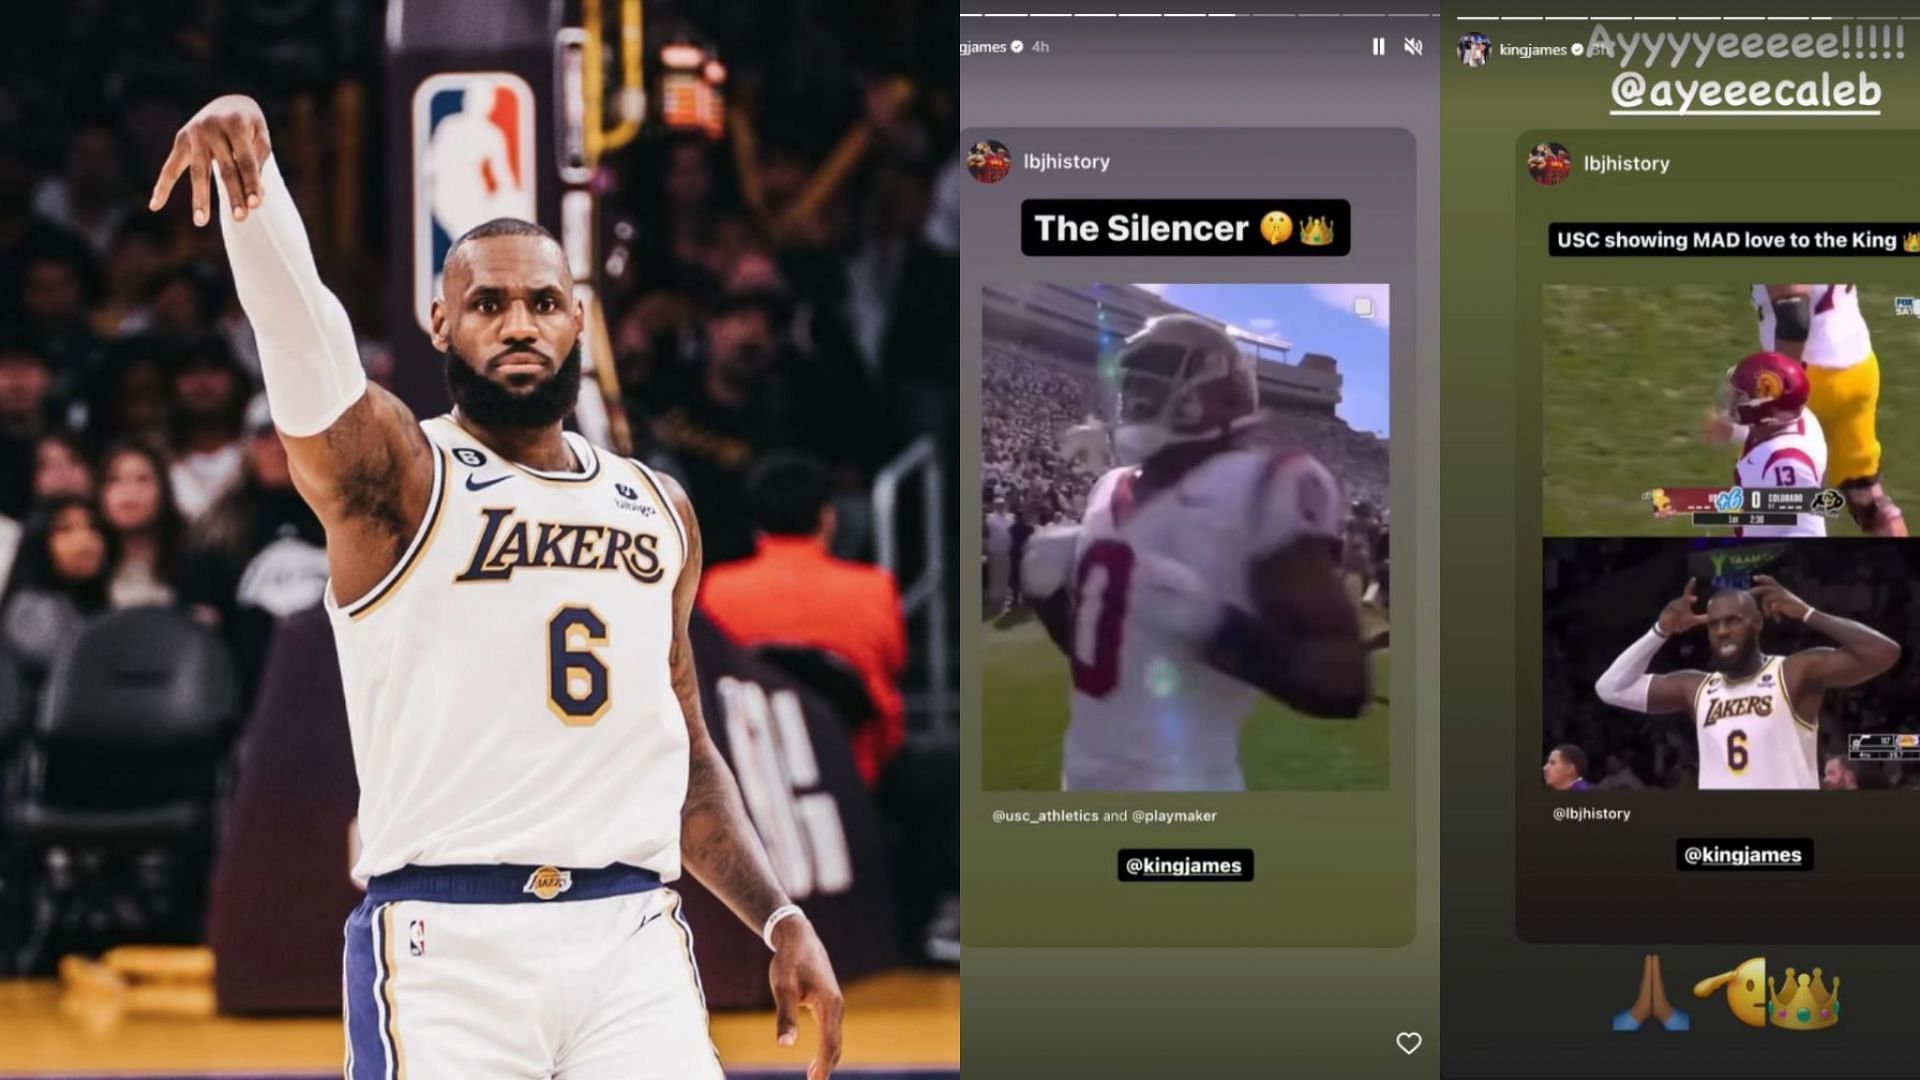 LeBron James reacts on Instagram as USC&rsquo;s MarShawn Lloyd and Caleb Williams pay tribute to his celebrations 